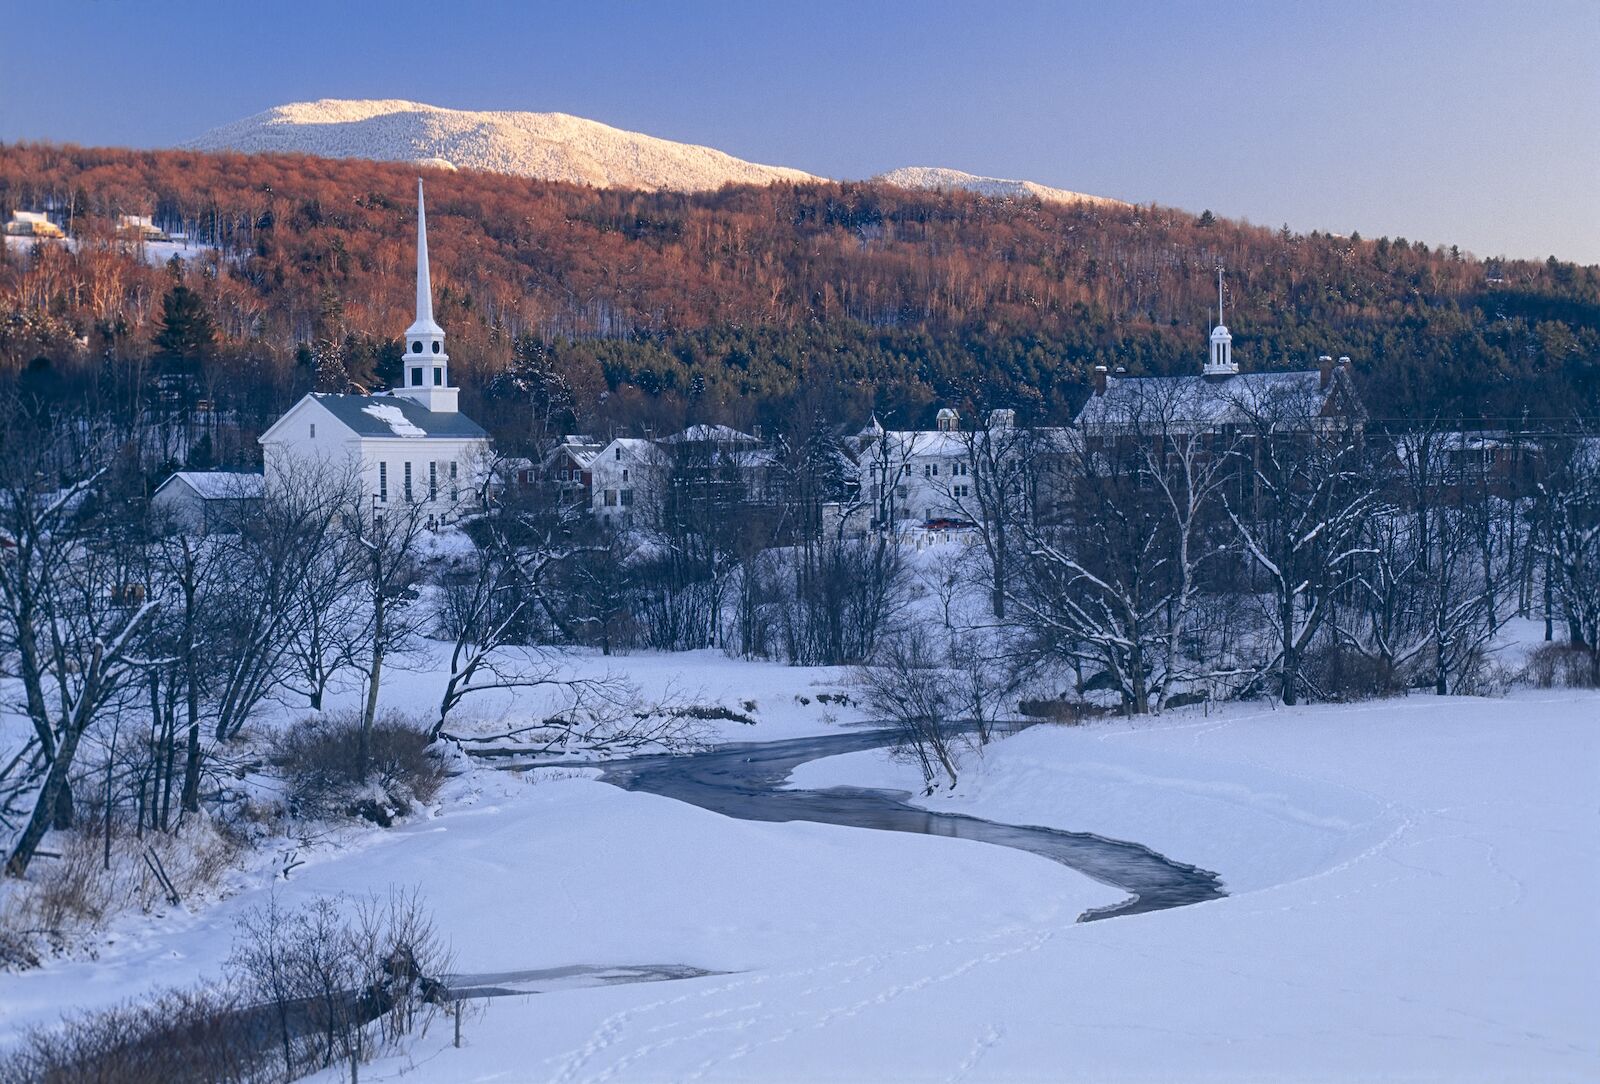 Village of Stowe in Vermont, accessible via the Amtrak's Vermonter, one of the best winter train rides in the world